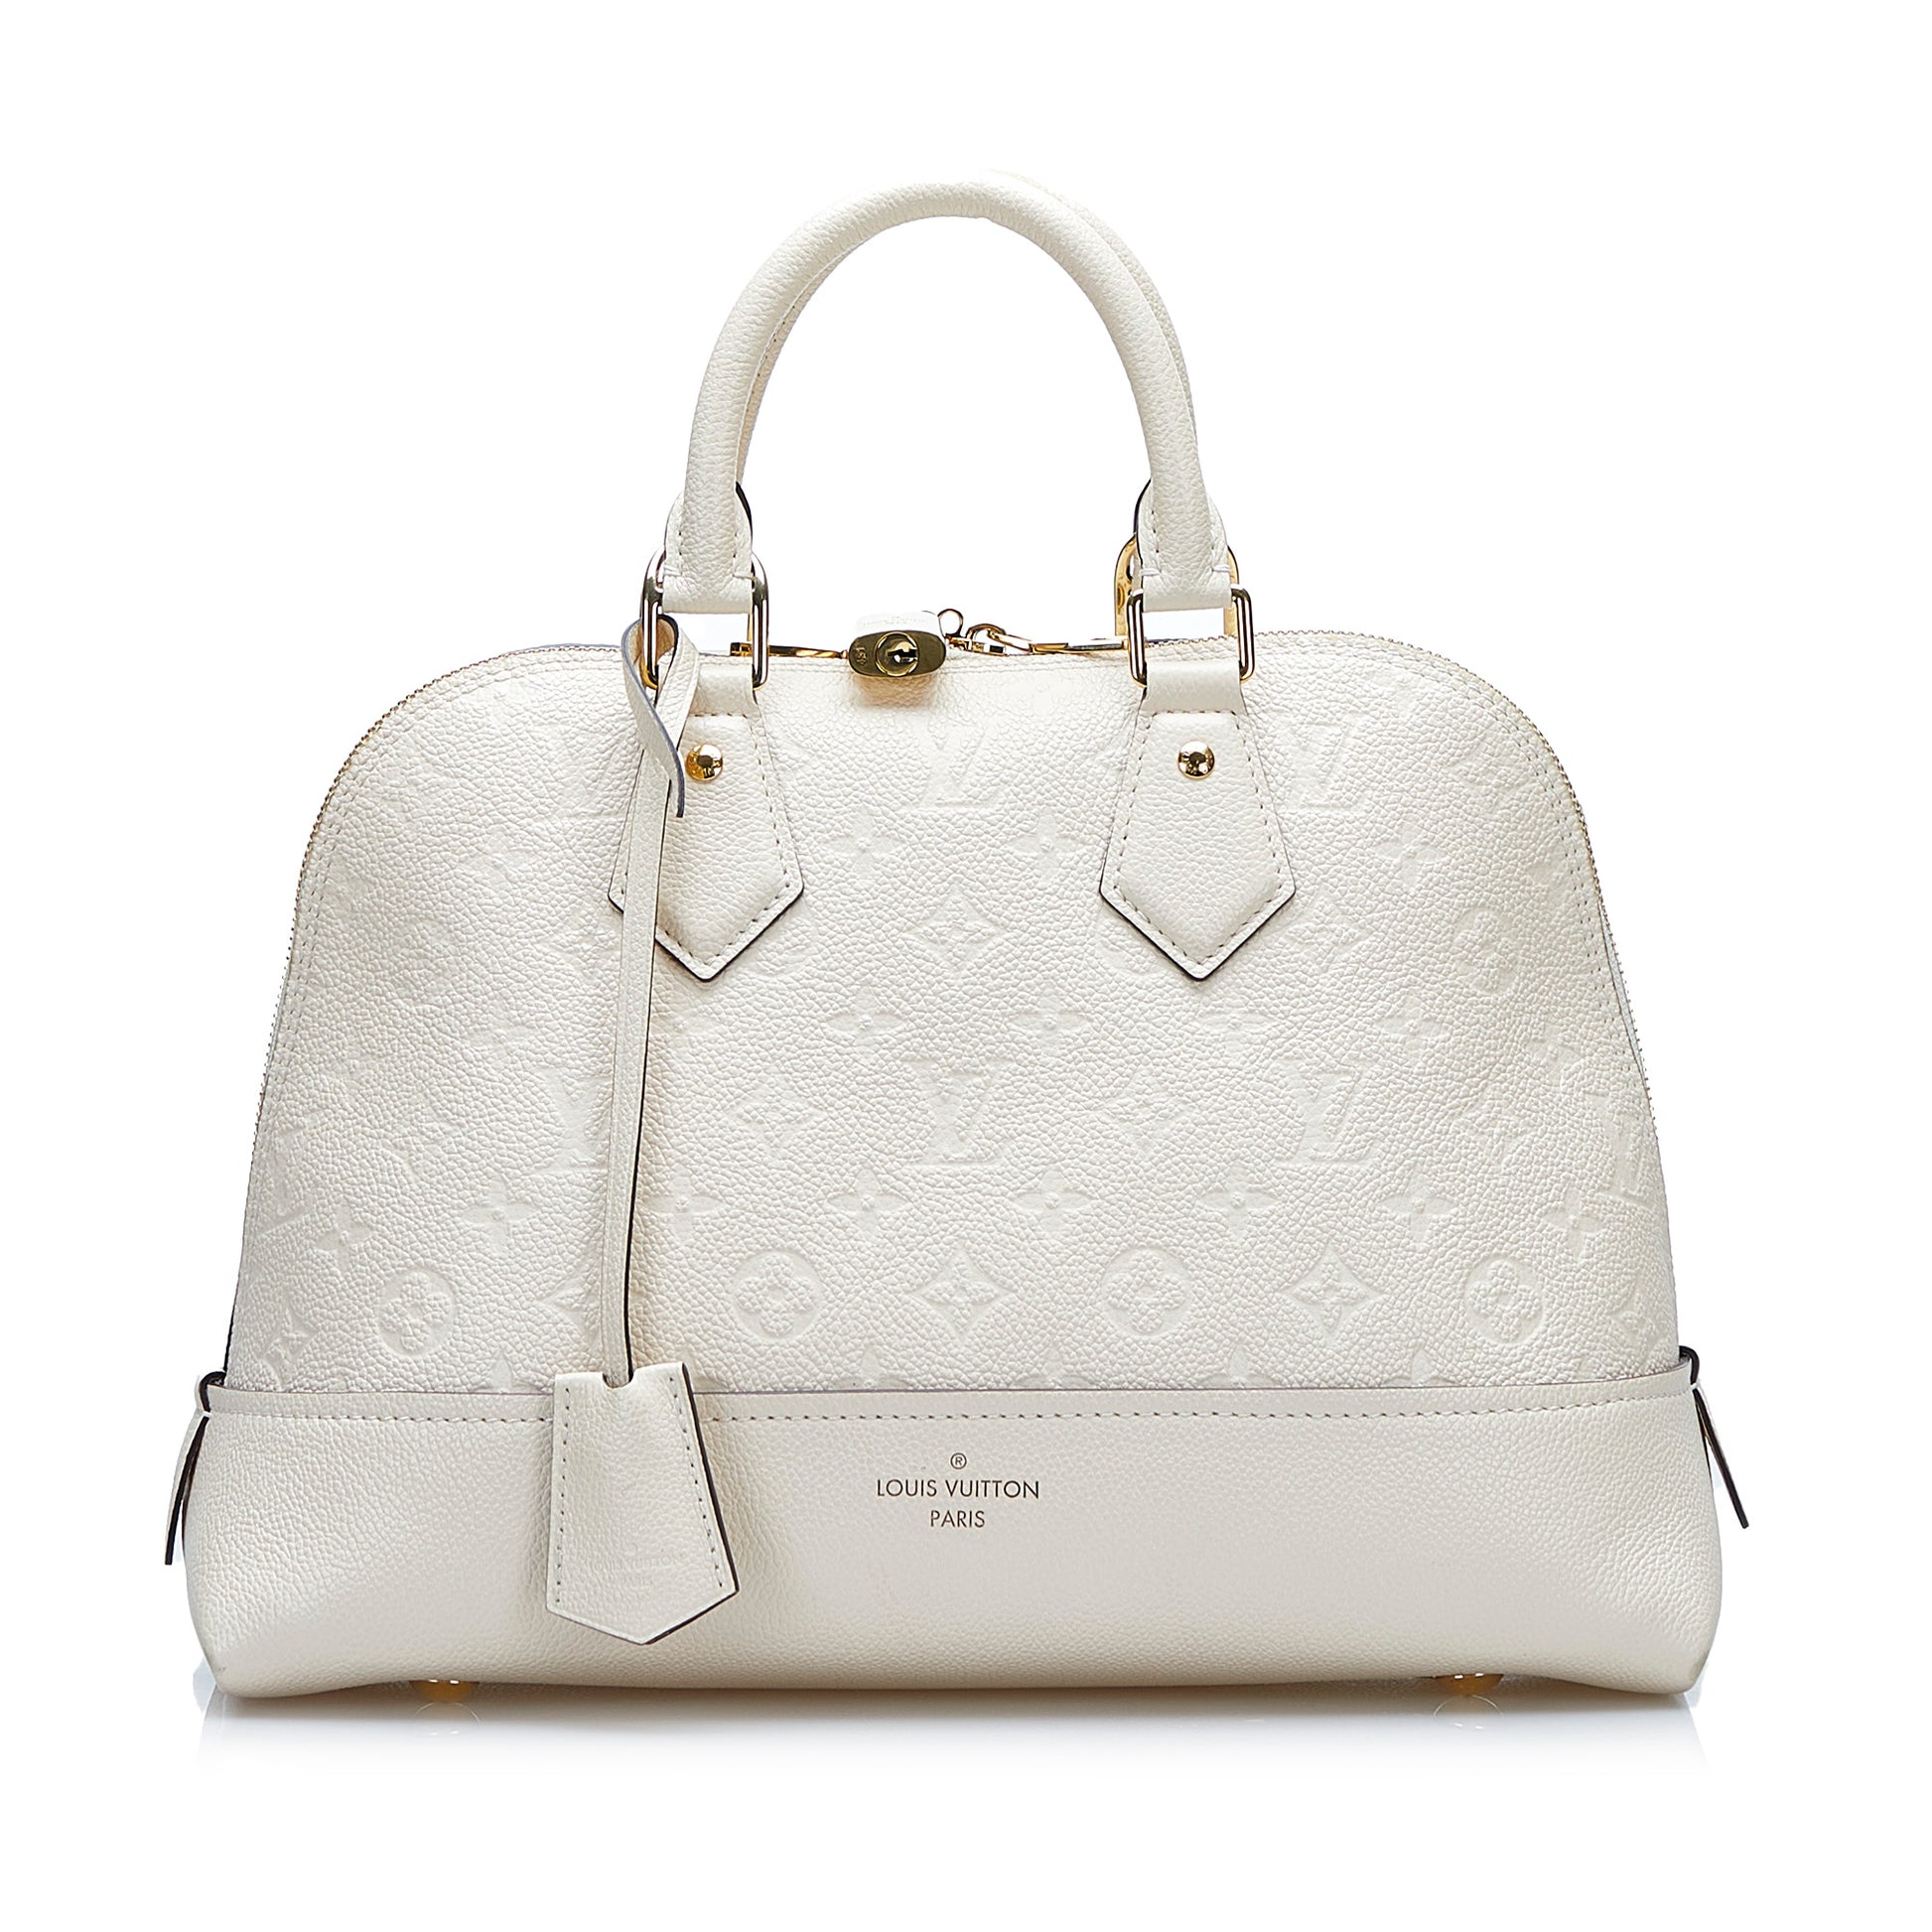 Products By Louis Vuitton: Neo Alma Pm